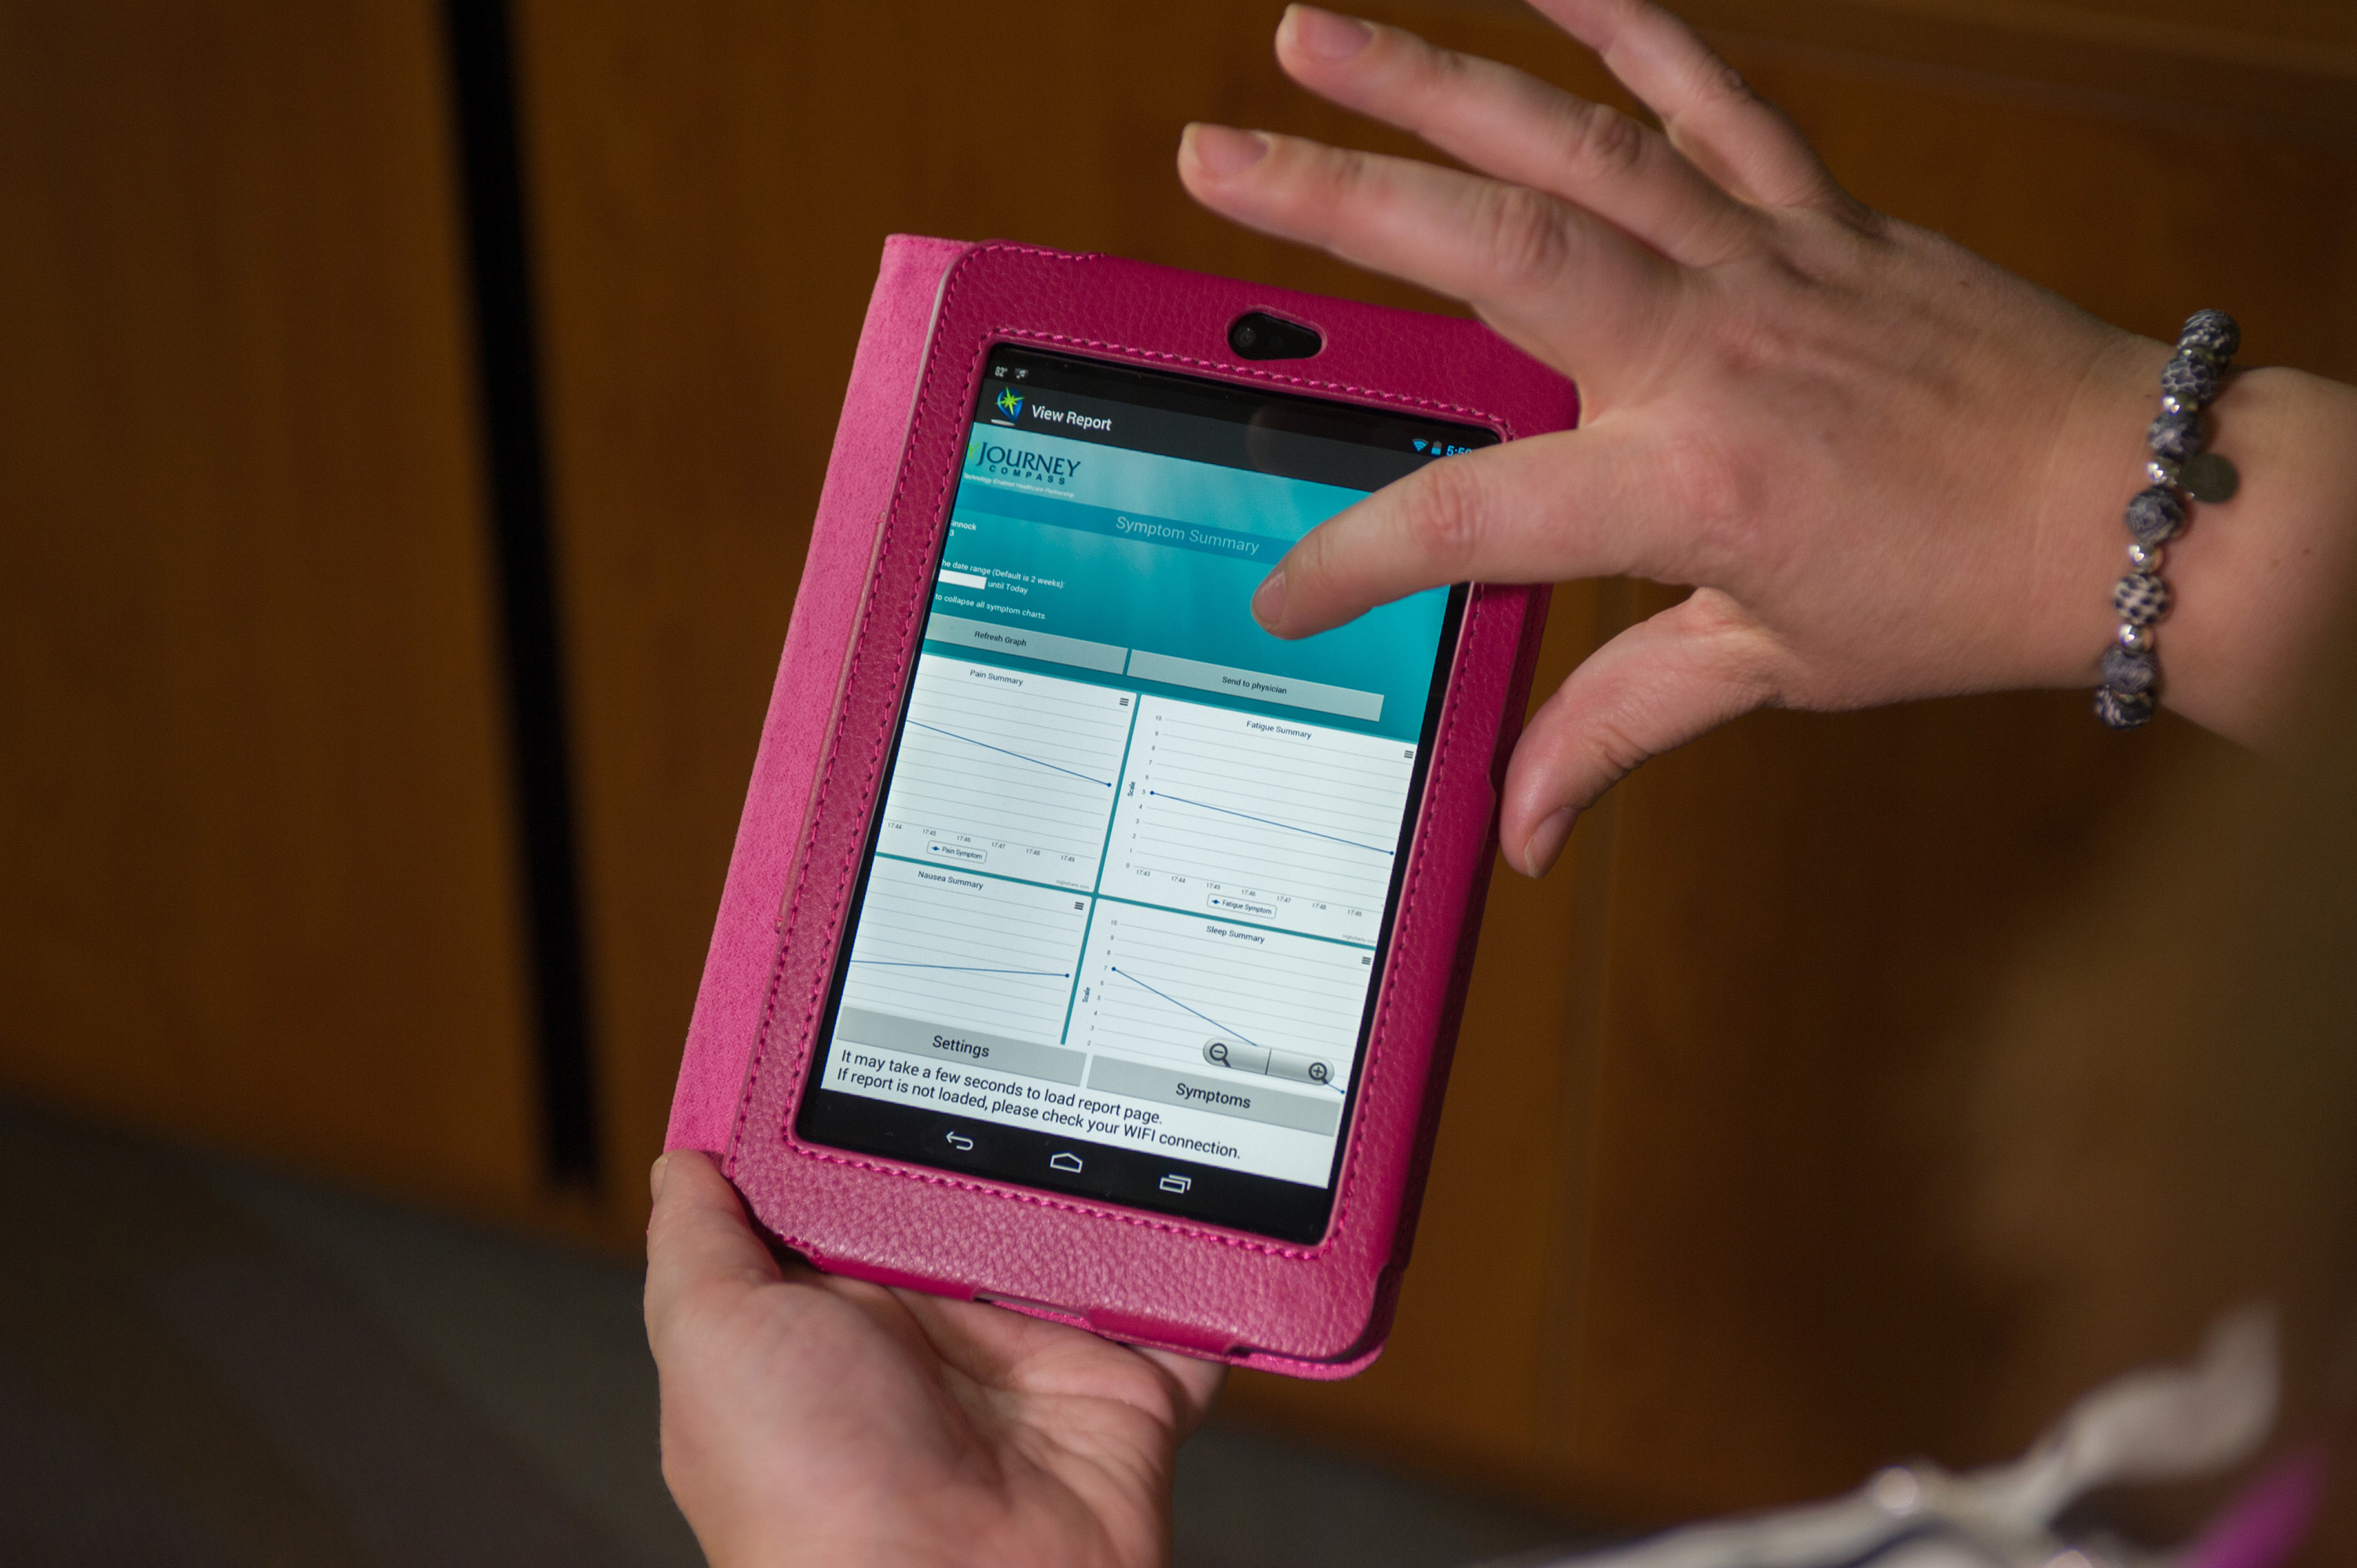 A Nexus 7 tablet computer is provided to patients through the MyJourney Compass pilot project. The computer provides medical information, access to health information records and a symptom tracker for regular communication with physicians. The screen shown is the symptom tracker. (Georgia Tech Photo: Rob Felt)